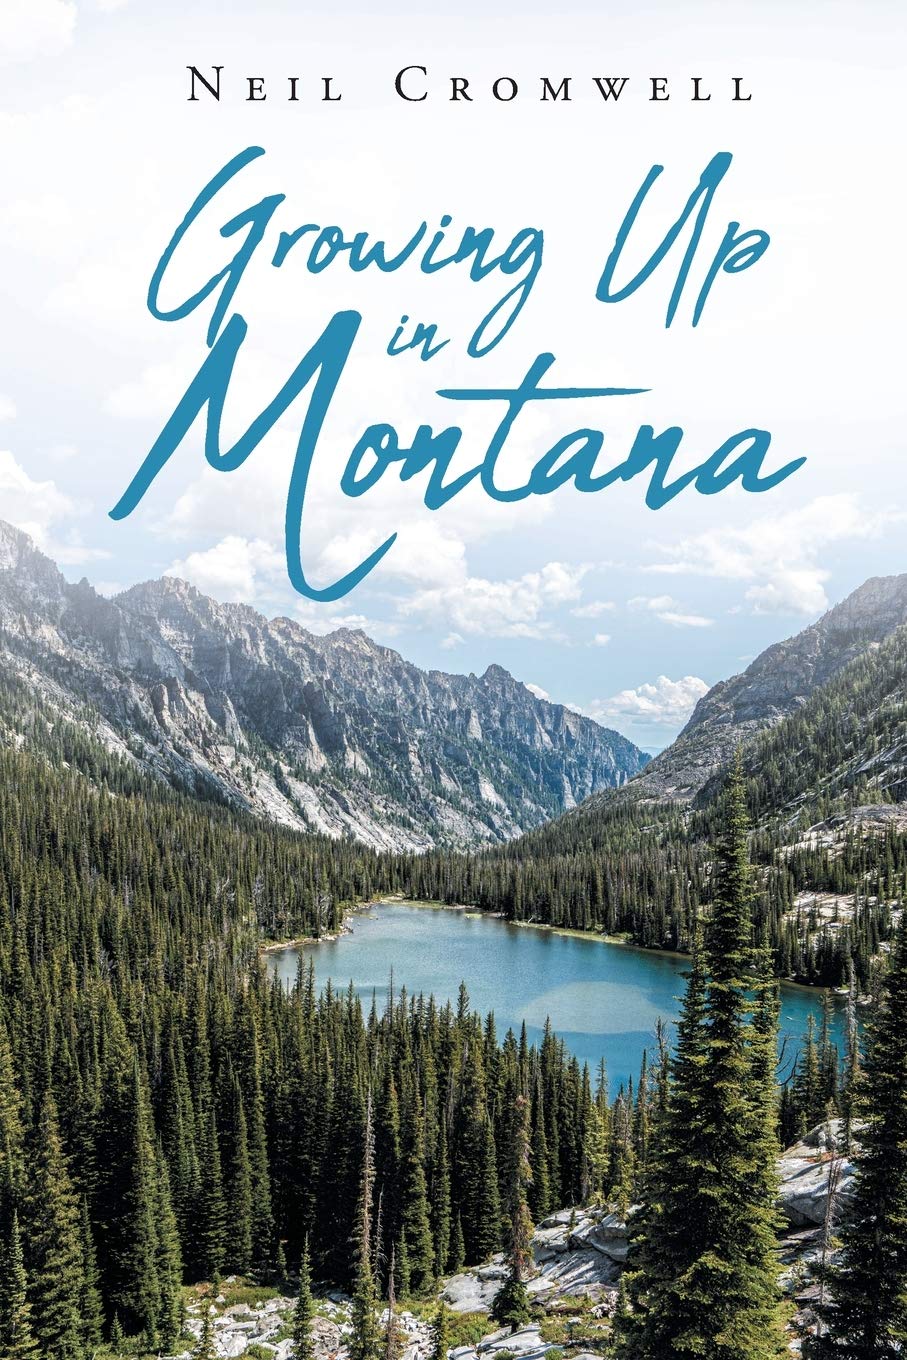 Frontlist | Neil Cromwell’s book “Growing Up in Montana” is nostalgic